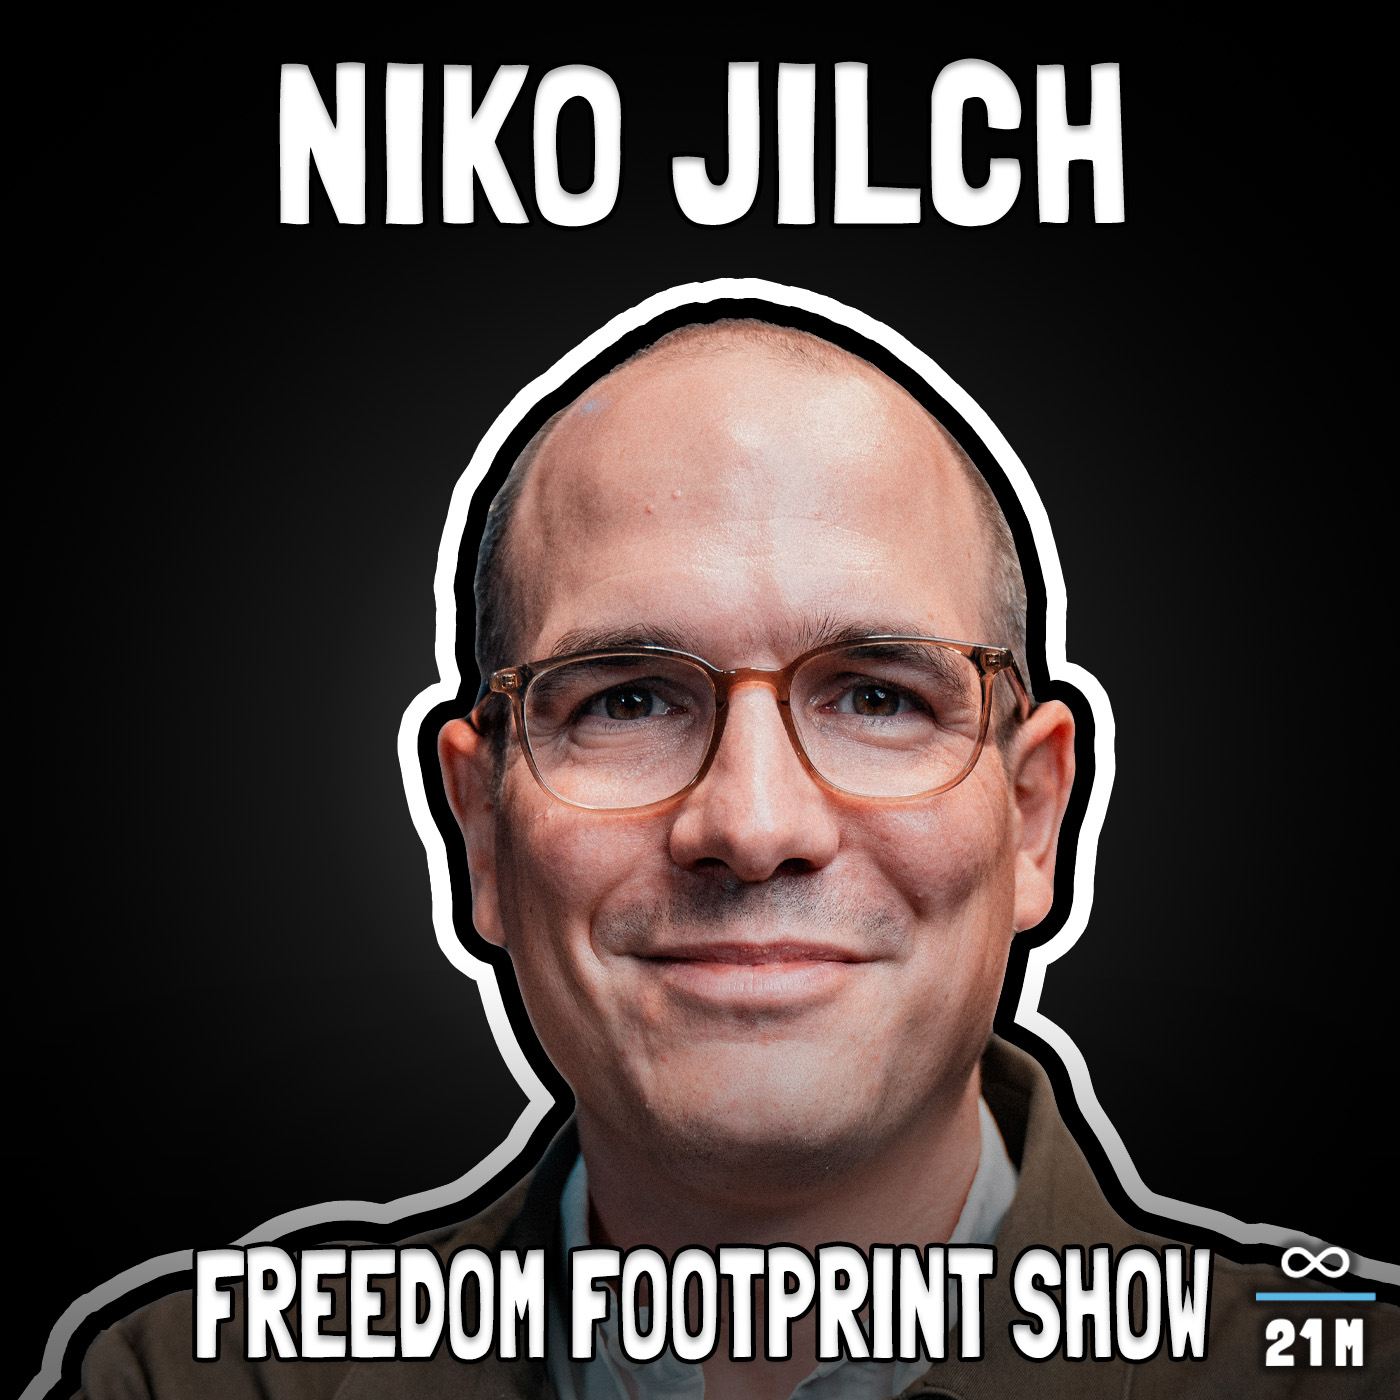 Bitcoin in the European Union with Niko Jilch - FFS #113